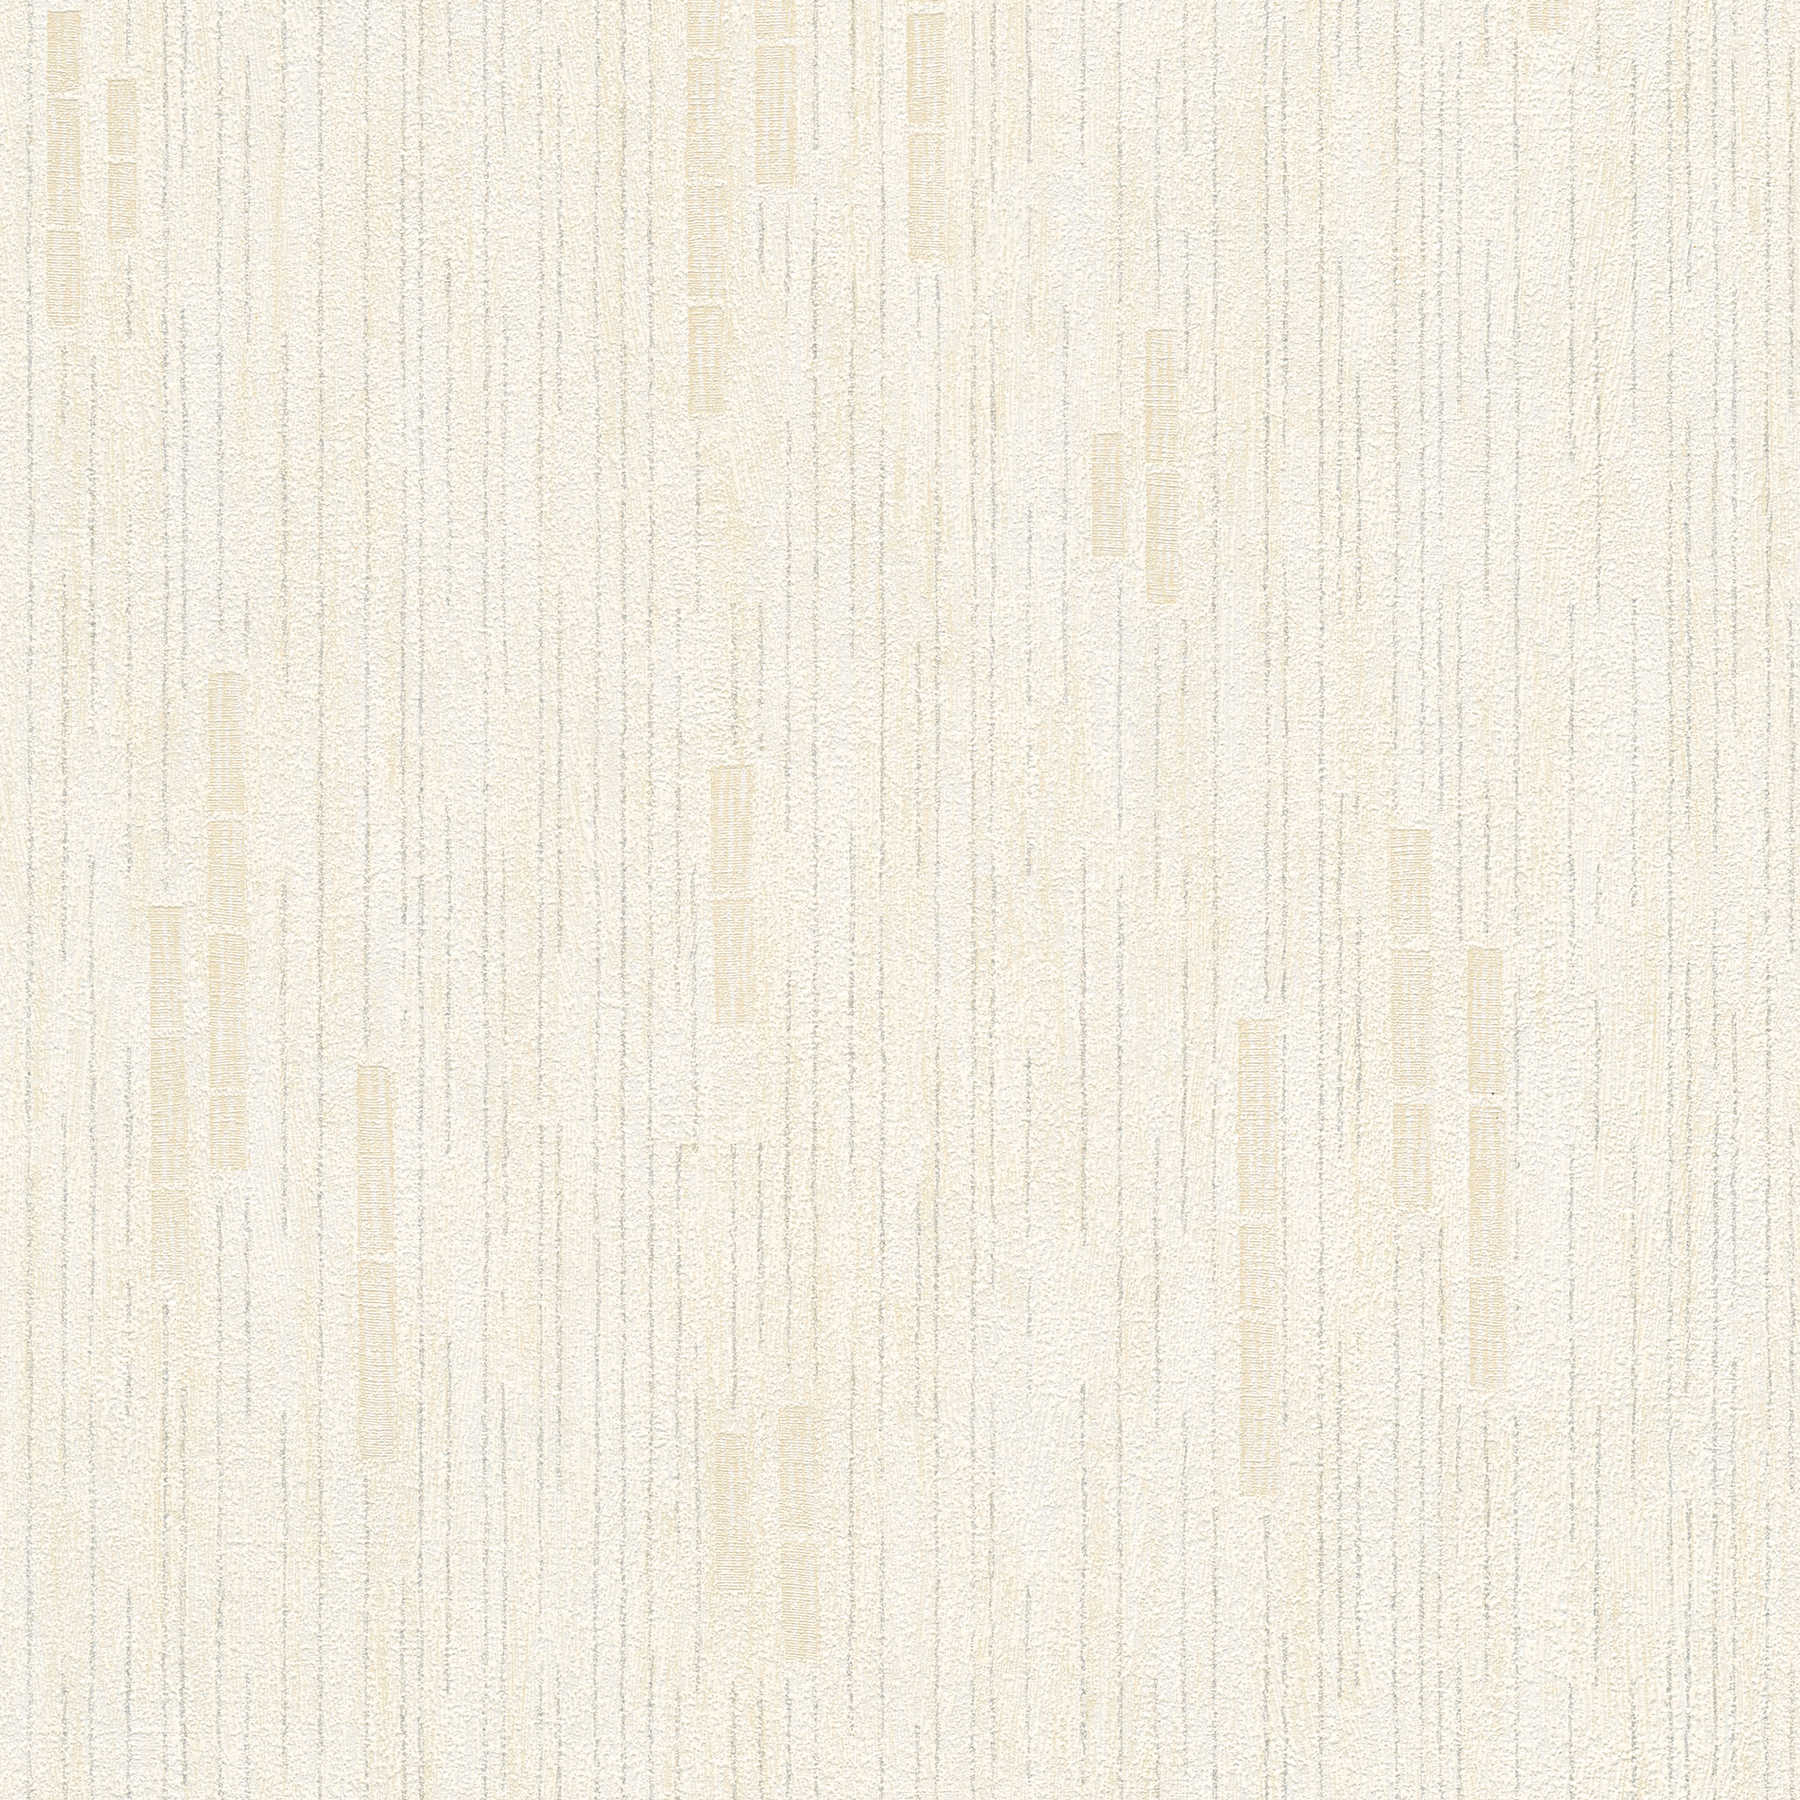 Wallpaper beige with abstract pattern & metallic accents
